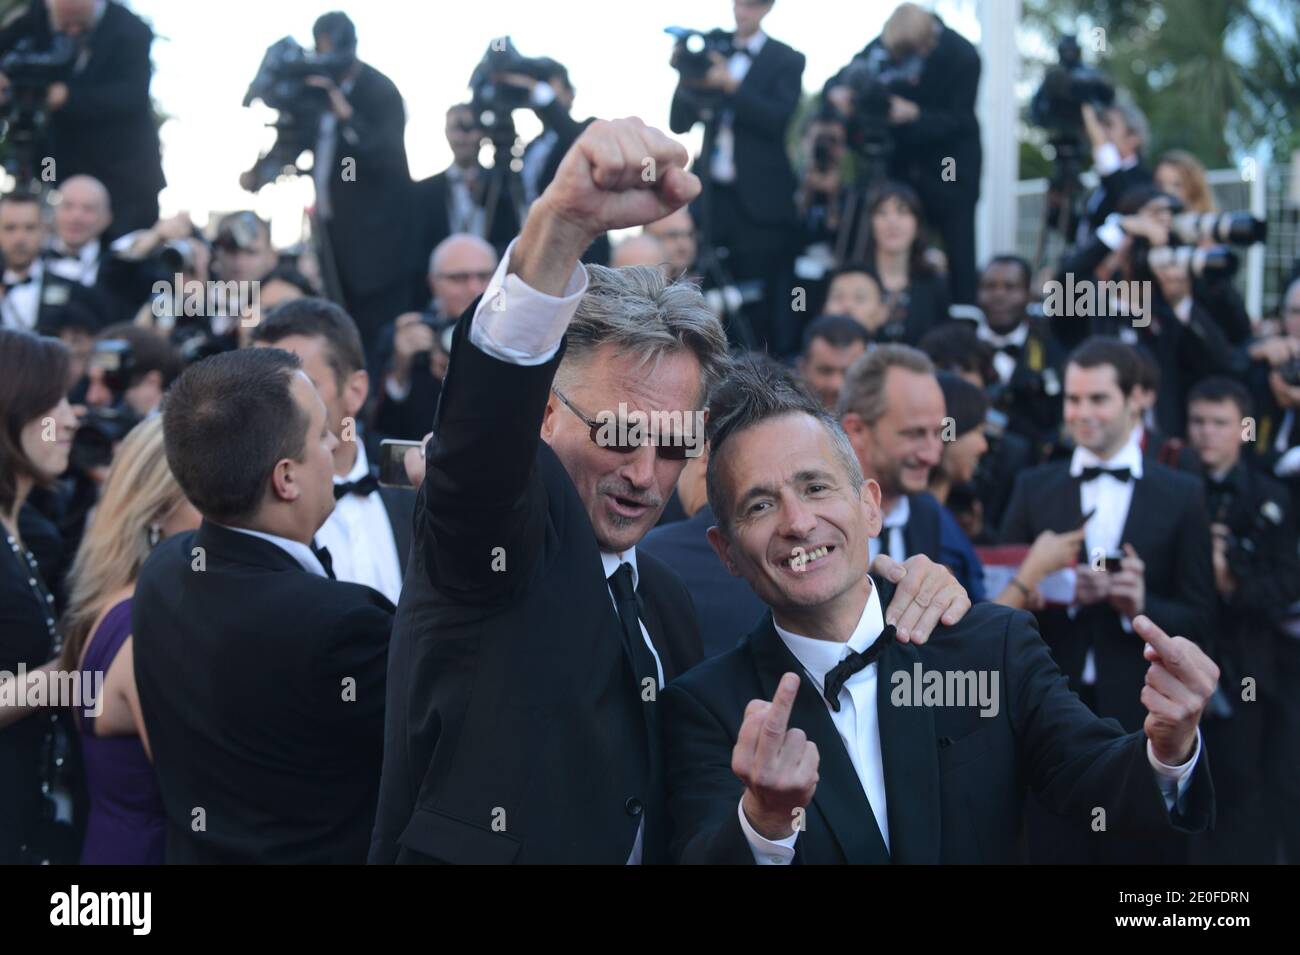 L-R : Benoit Delepine and Didier Wampas arrive for the screening of 'Killing Them Softly' at 65th Cannes Film Festival, in Cannes, France on May 22, 2012. Photo by Ammar Abd Rabbo/ABACAPRESS.COM Stock Photo